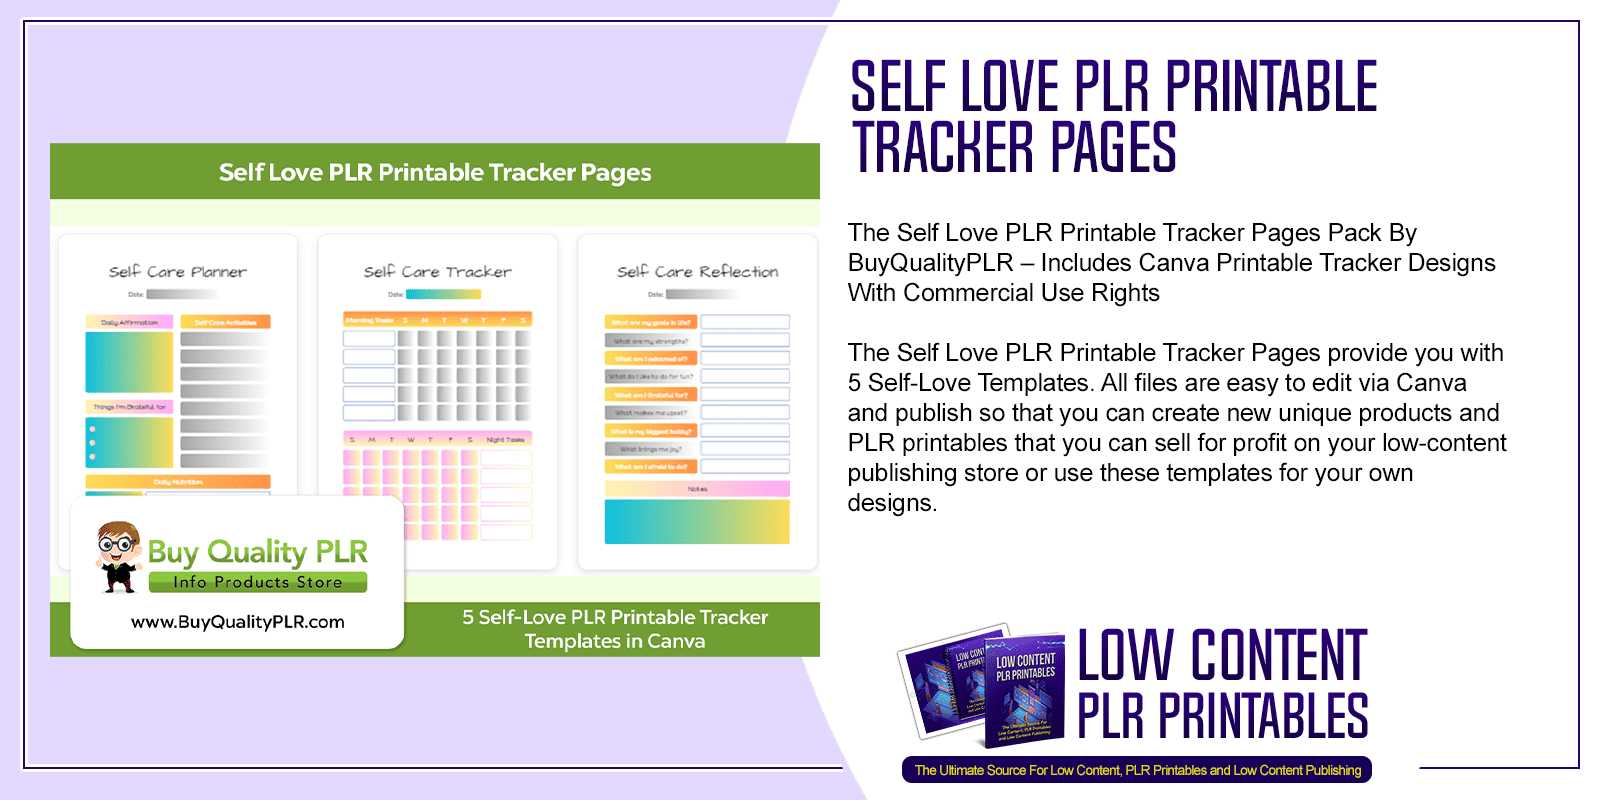 Self Love PLR Printable Tracker Pages